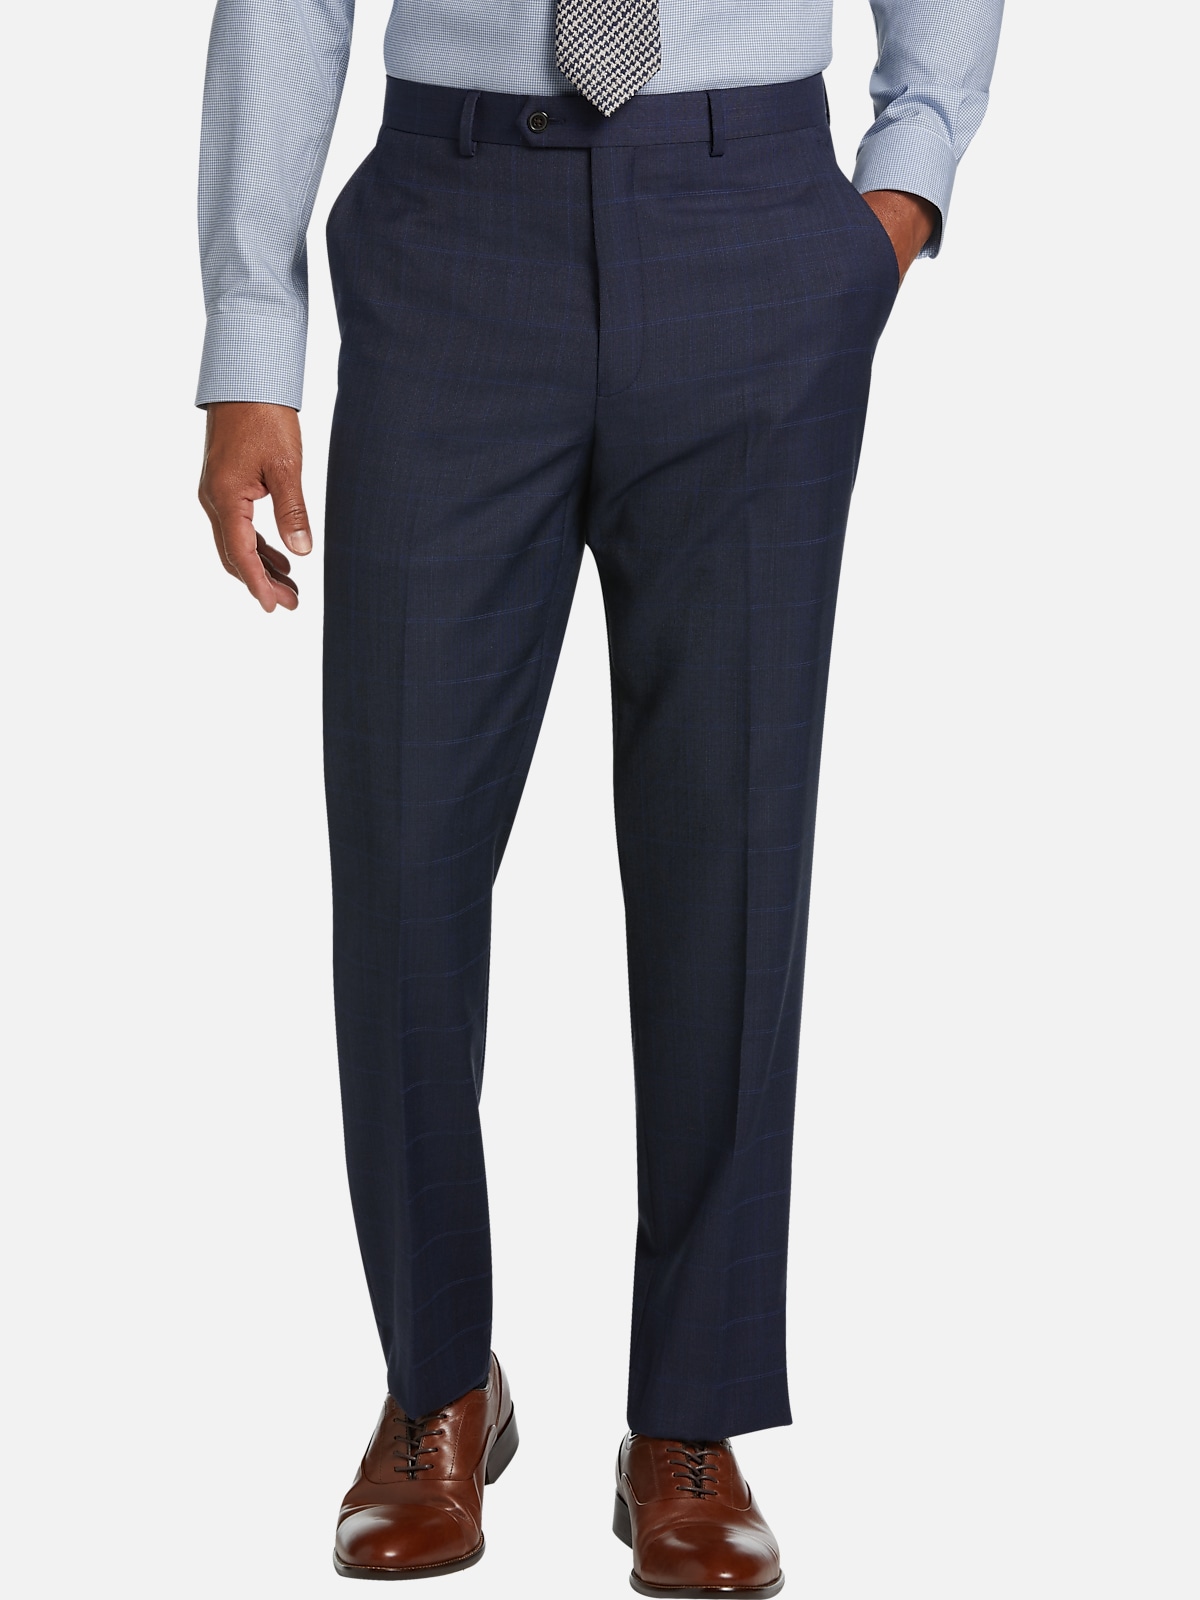 https://image.menswearhouse.com/is/image/TMW/TMW_3W7R_67_LAUREN_BY_RALPH_LAUREN_SUIT_SEPARATE_PANTS_BLUE_PLAID_MAIN?imPolicy=pdp-zoom-mob